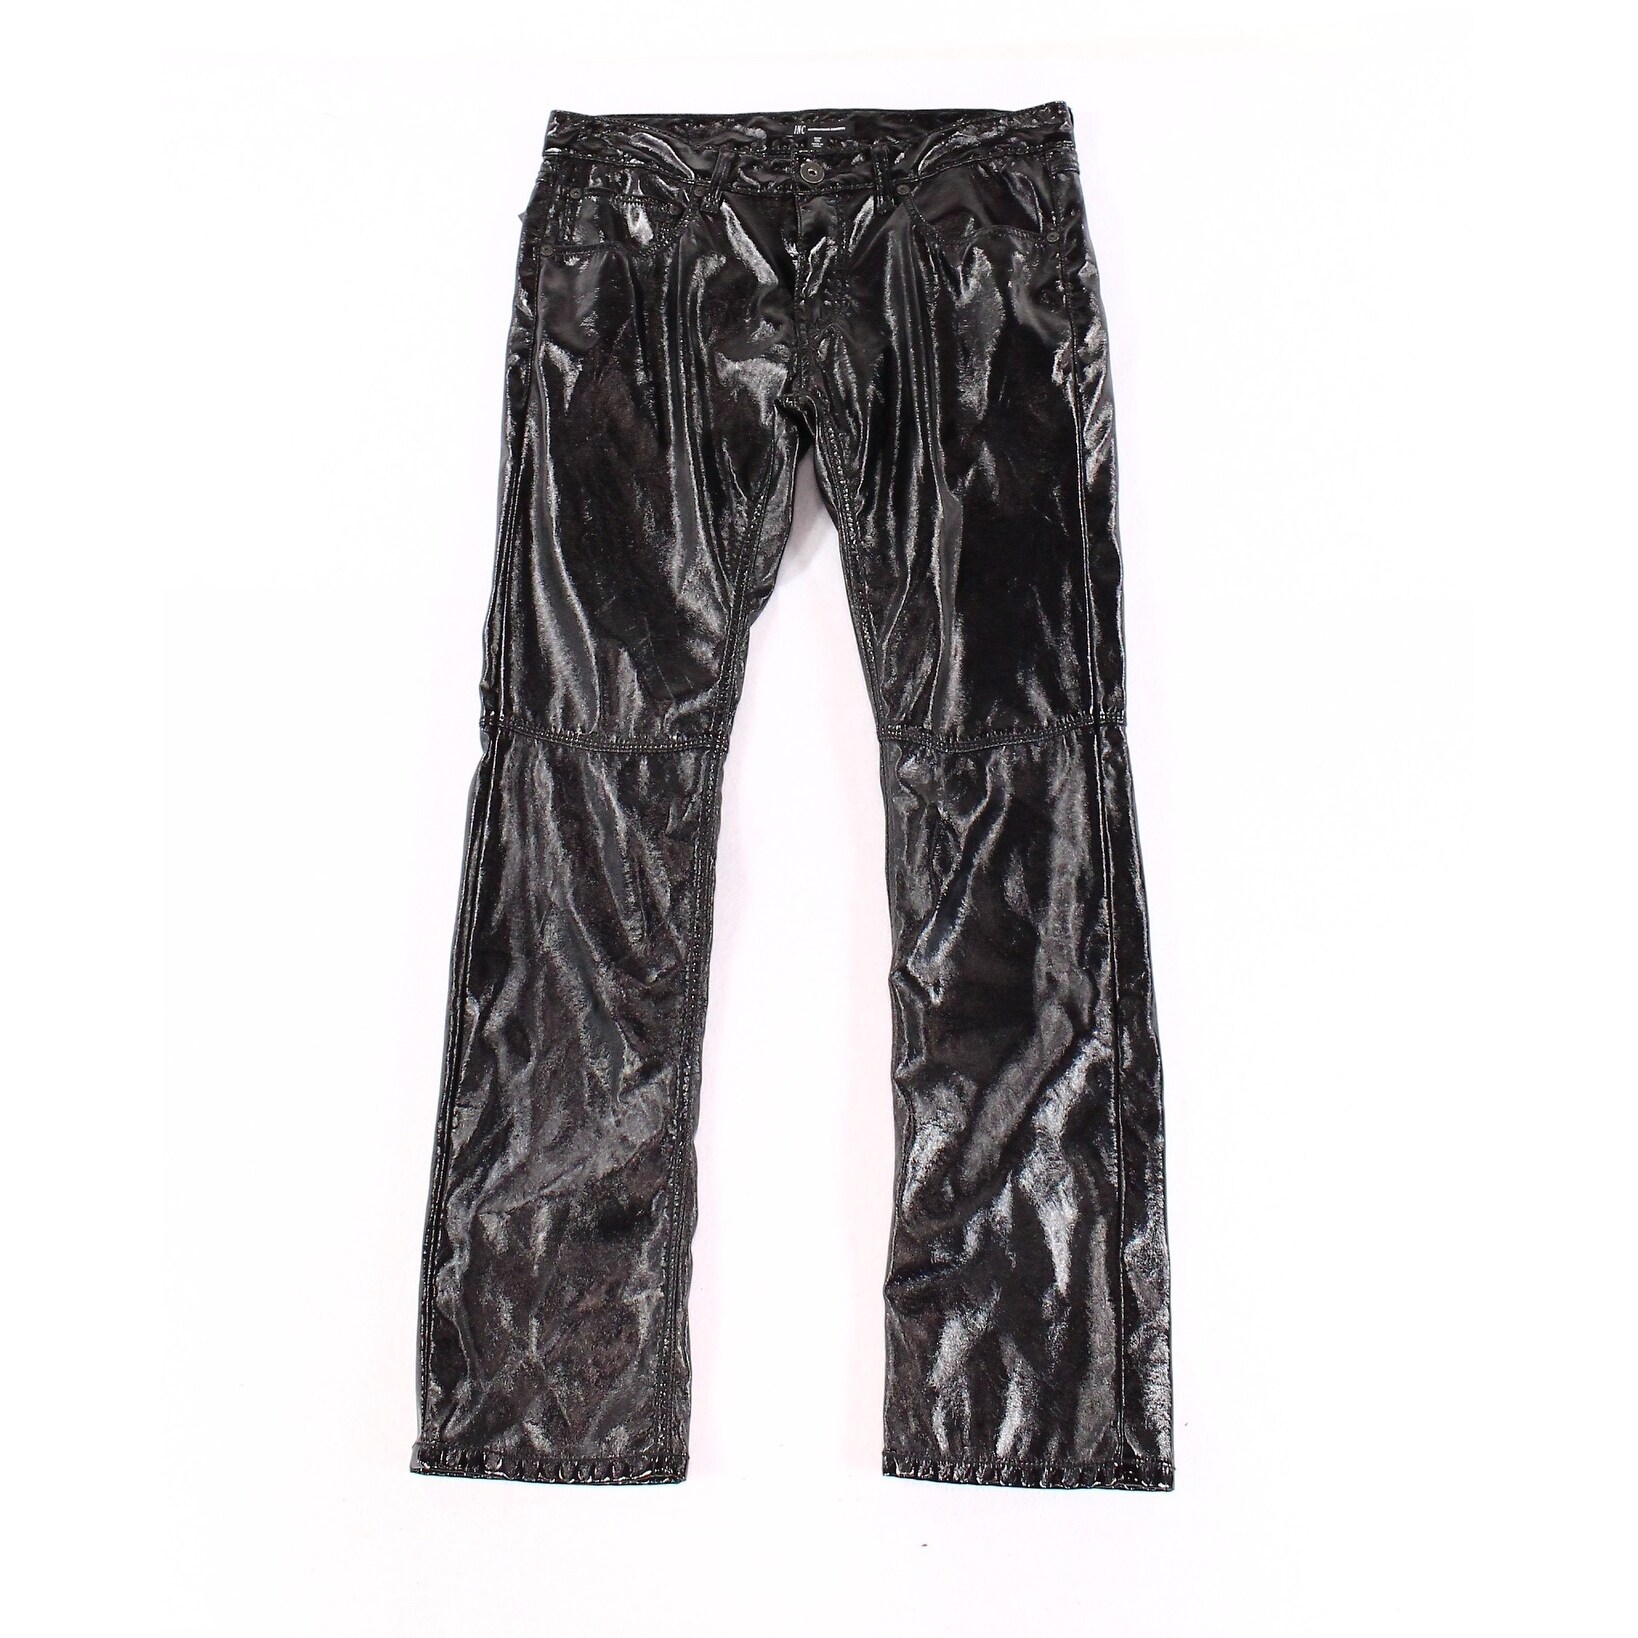 mens low rise leather pants